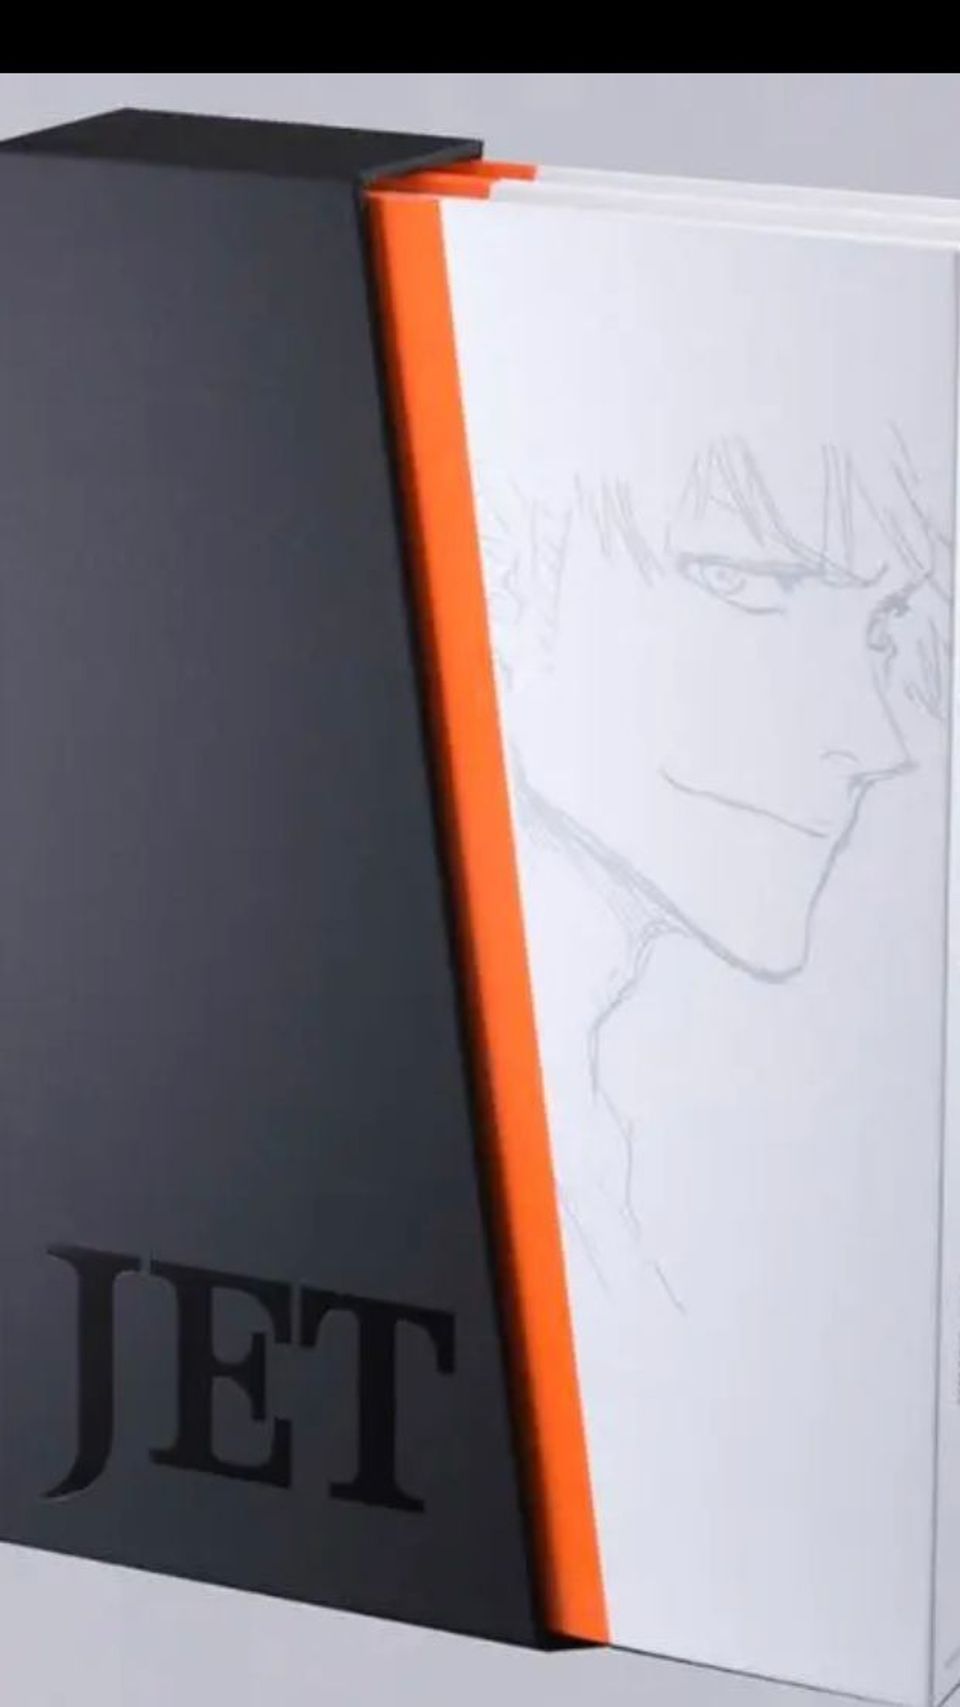 This is an offer made on the Request: Bleach Jet Artbook